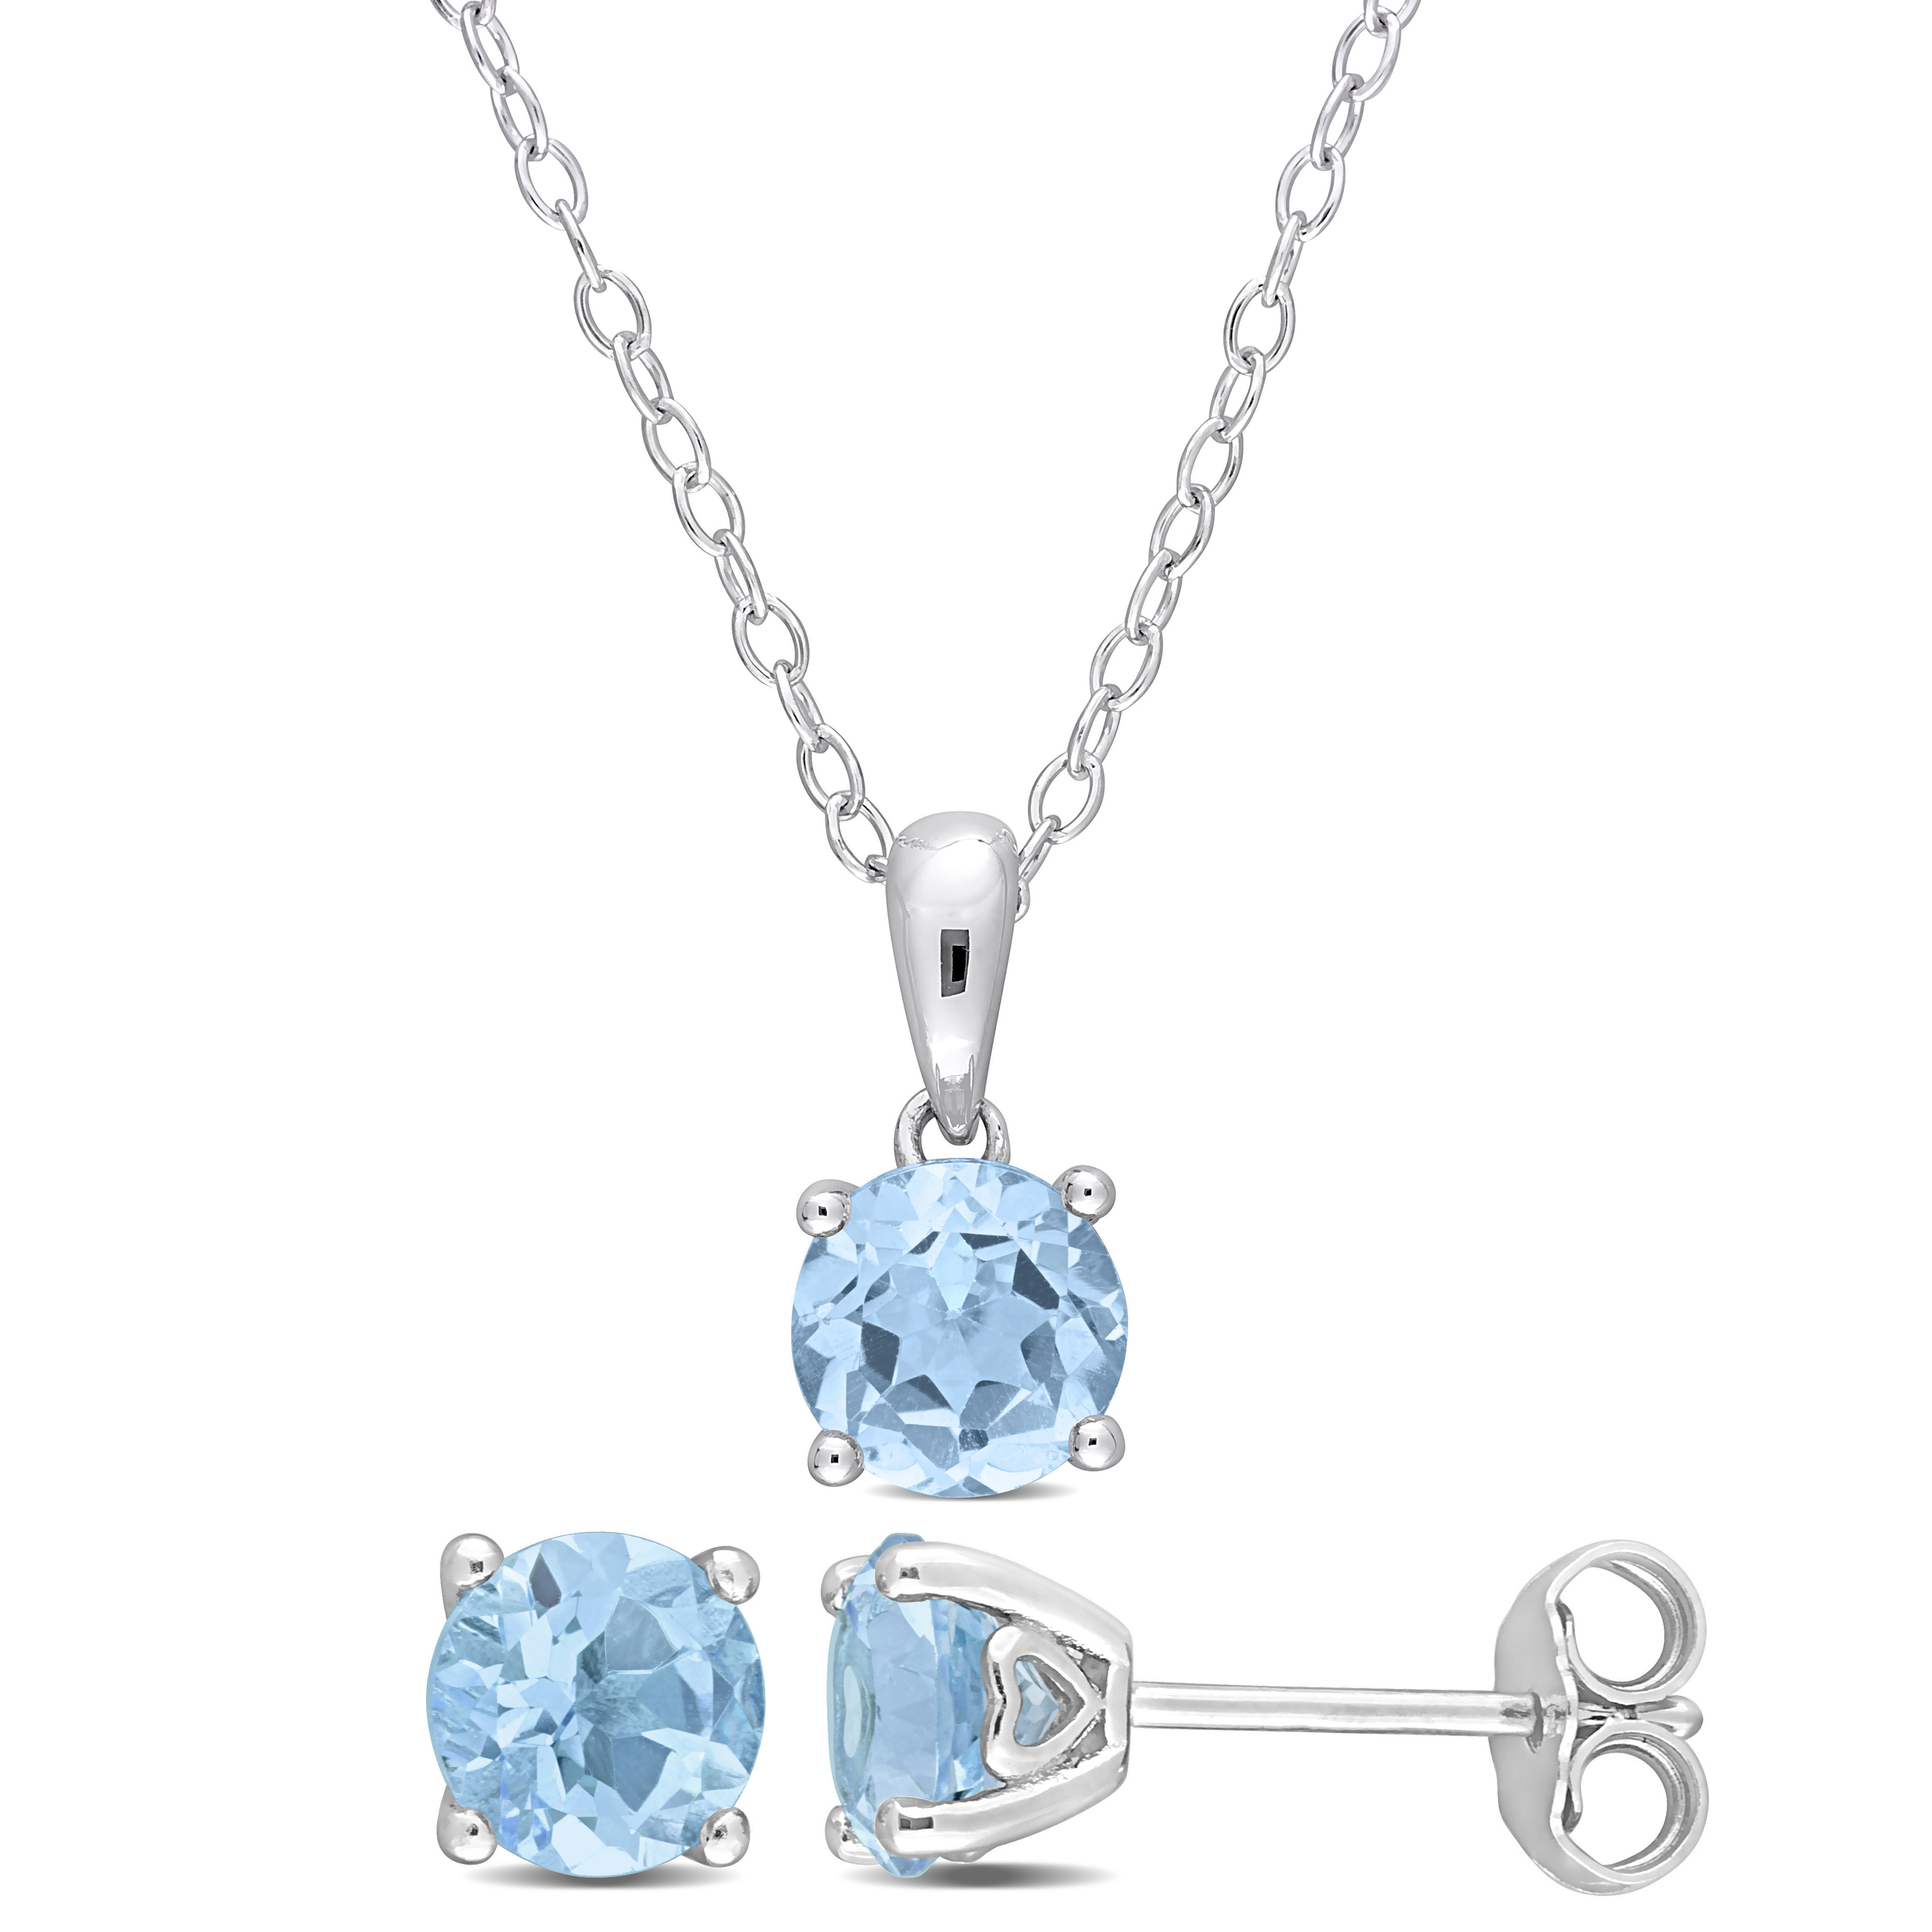 3 CT TGW Sky Blue Topaz 2-Piece Solitaire Pendant with Chain and Stud Earrings Set in Sterling Silver